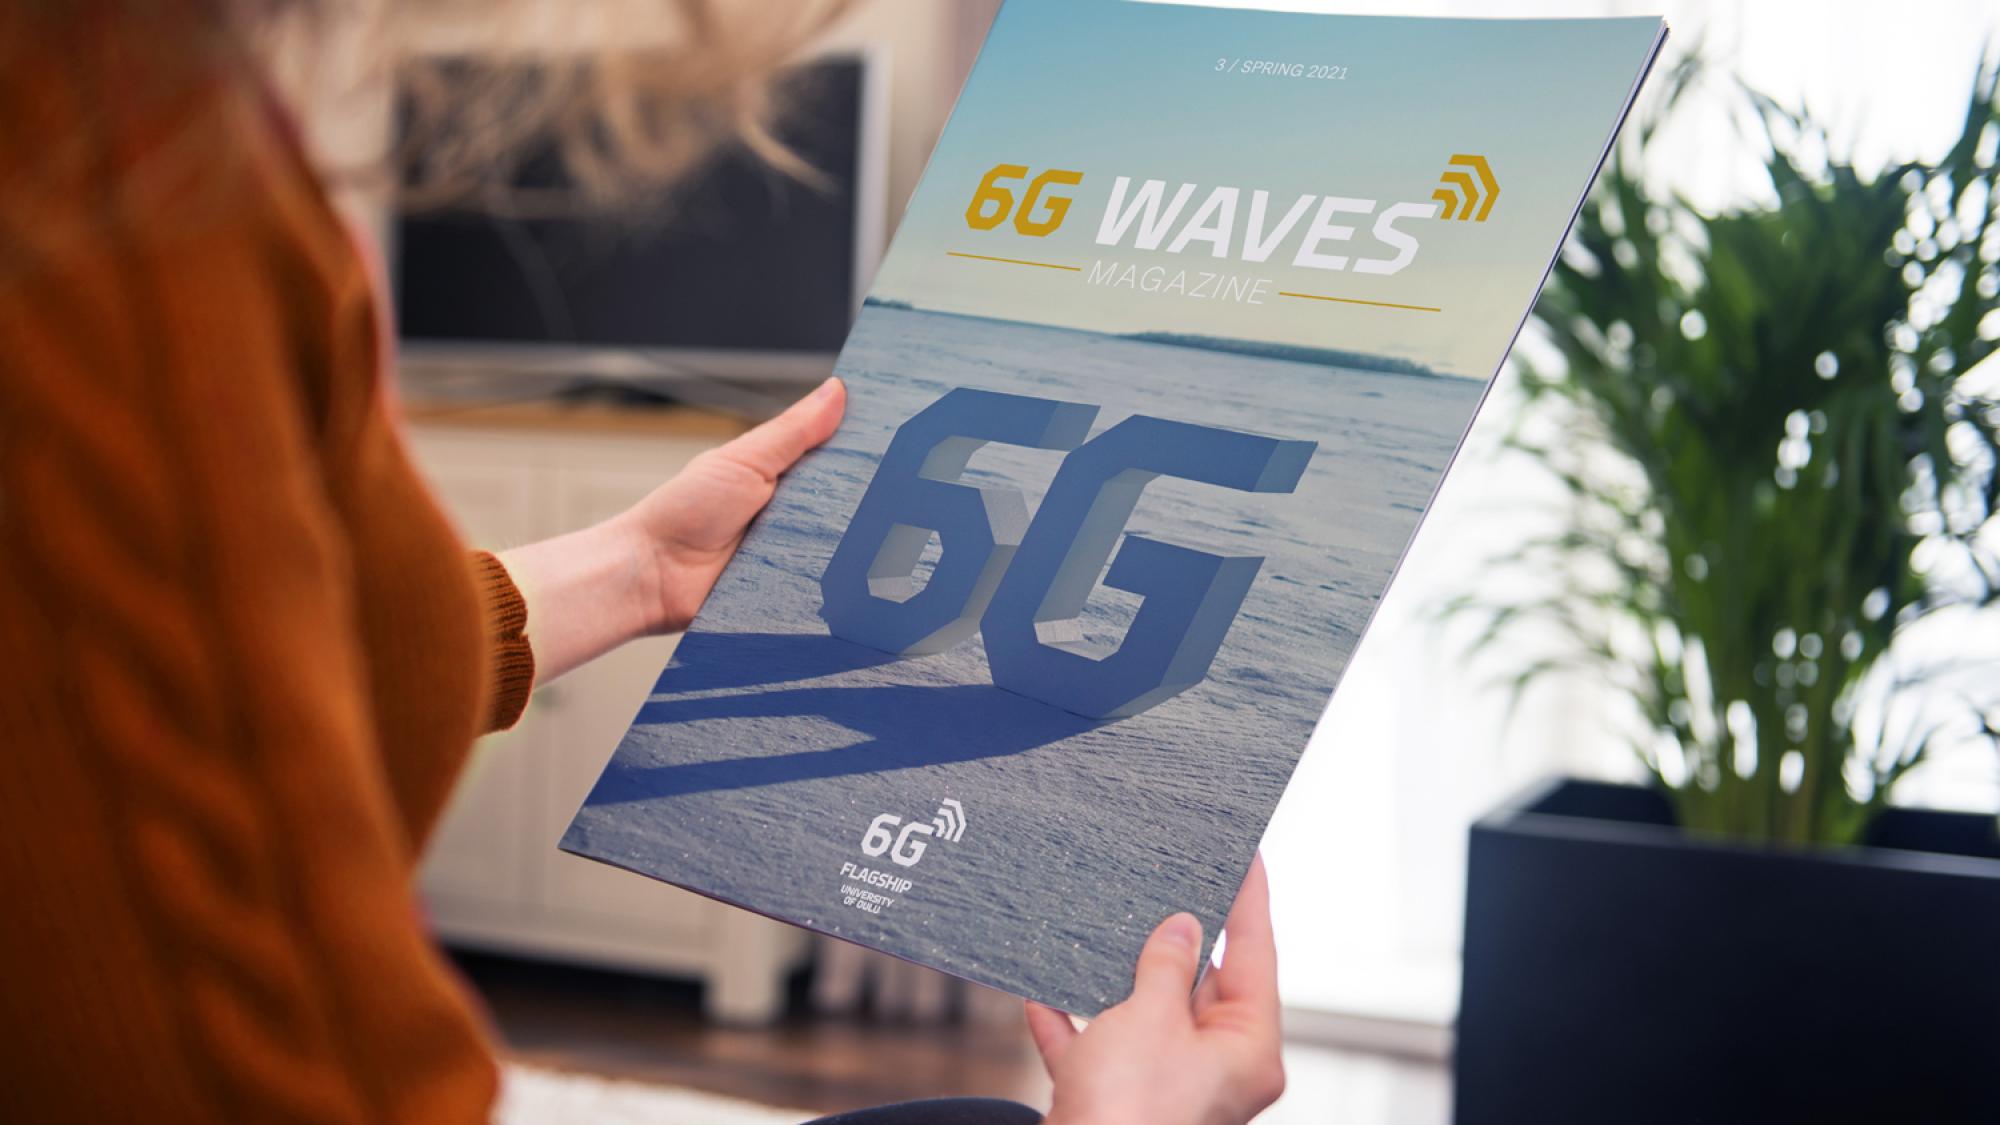 The latest 6G magazine informs and inspires